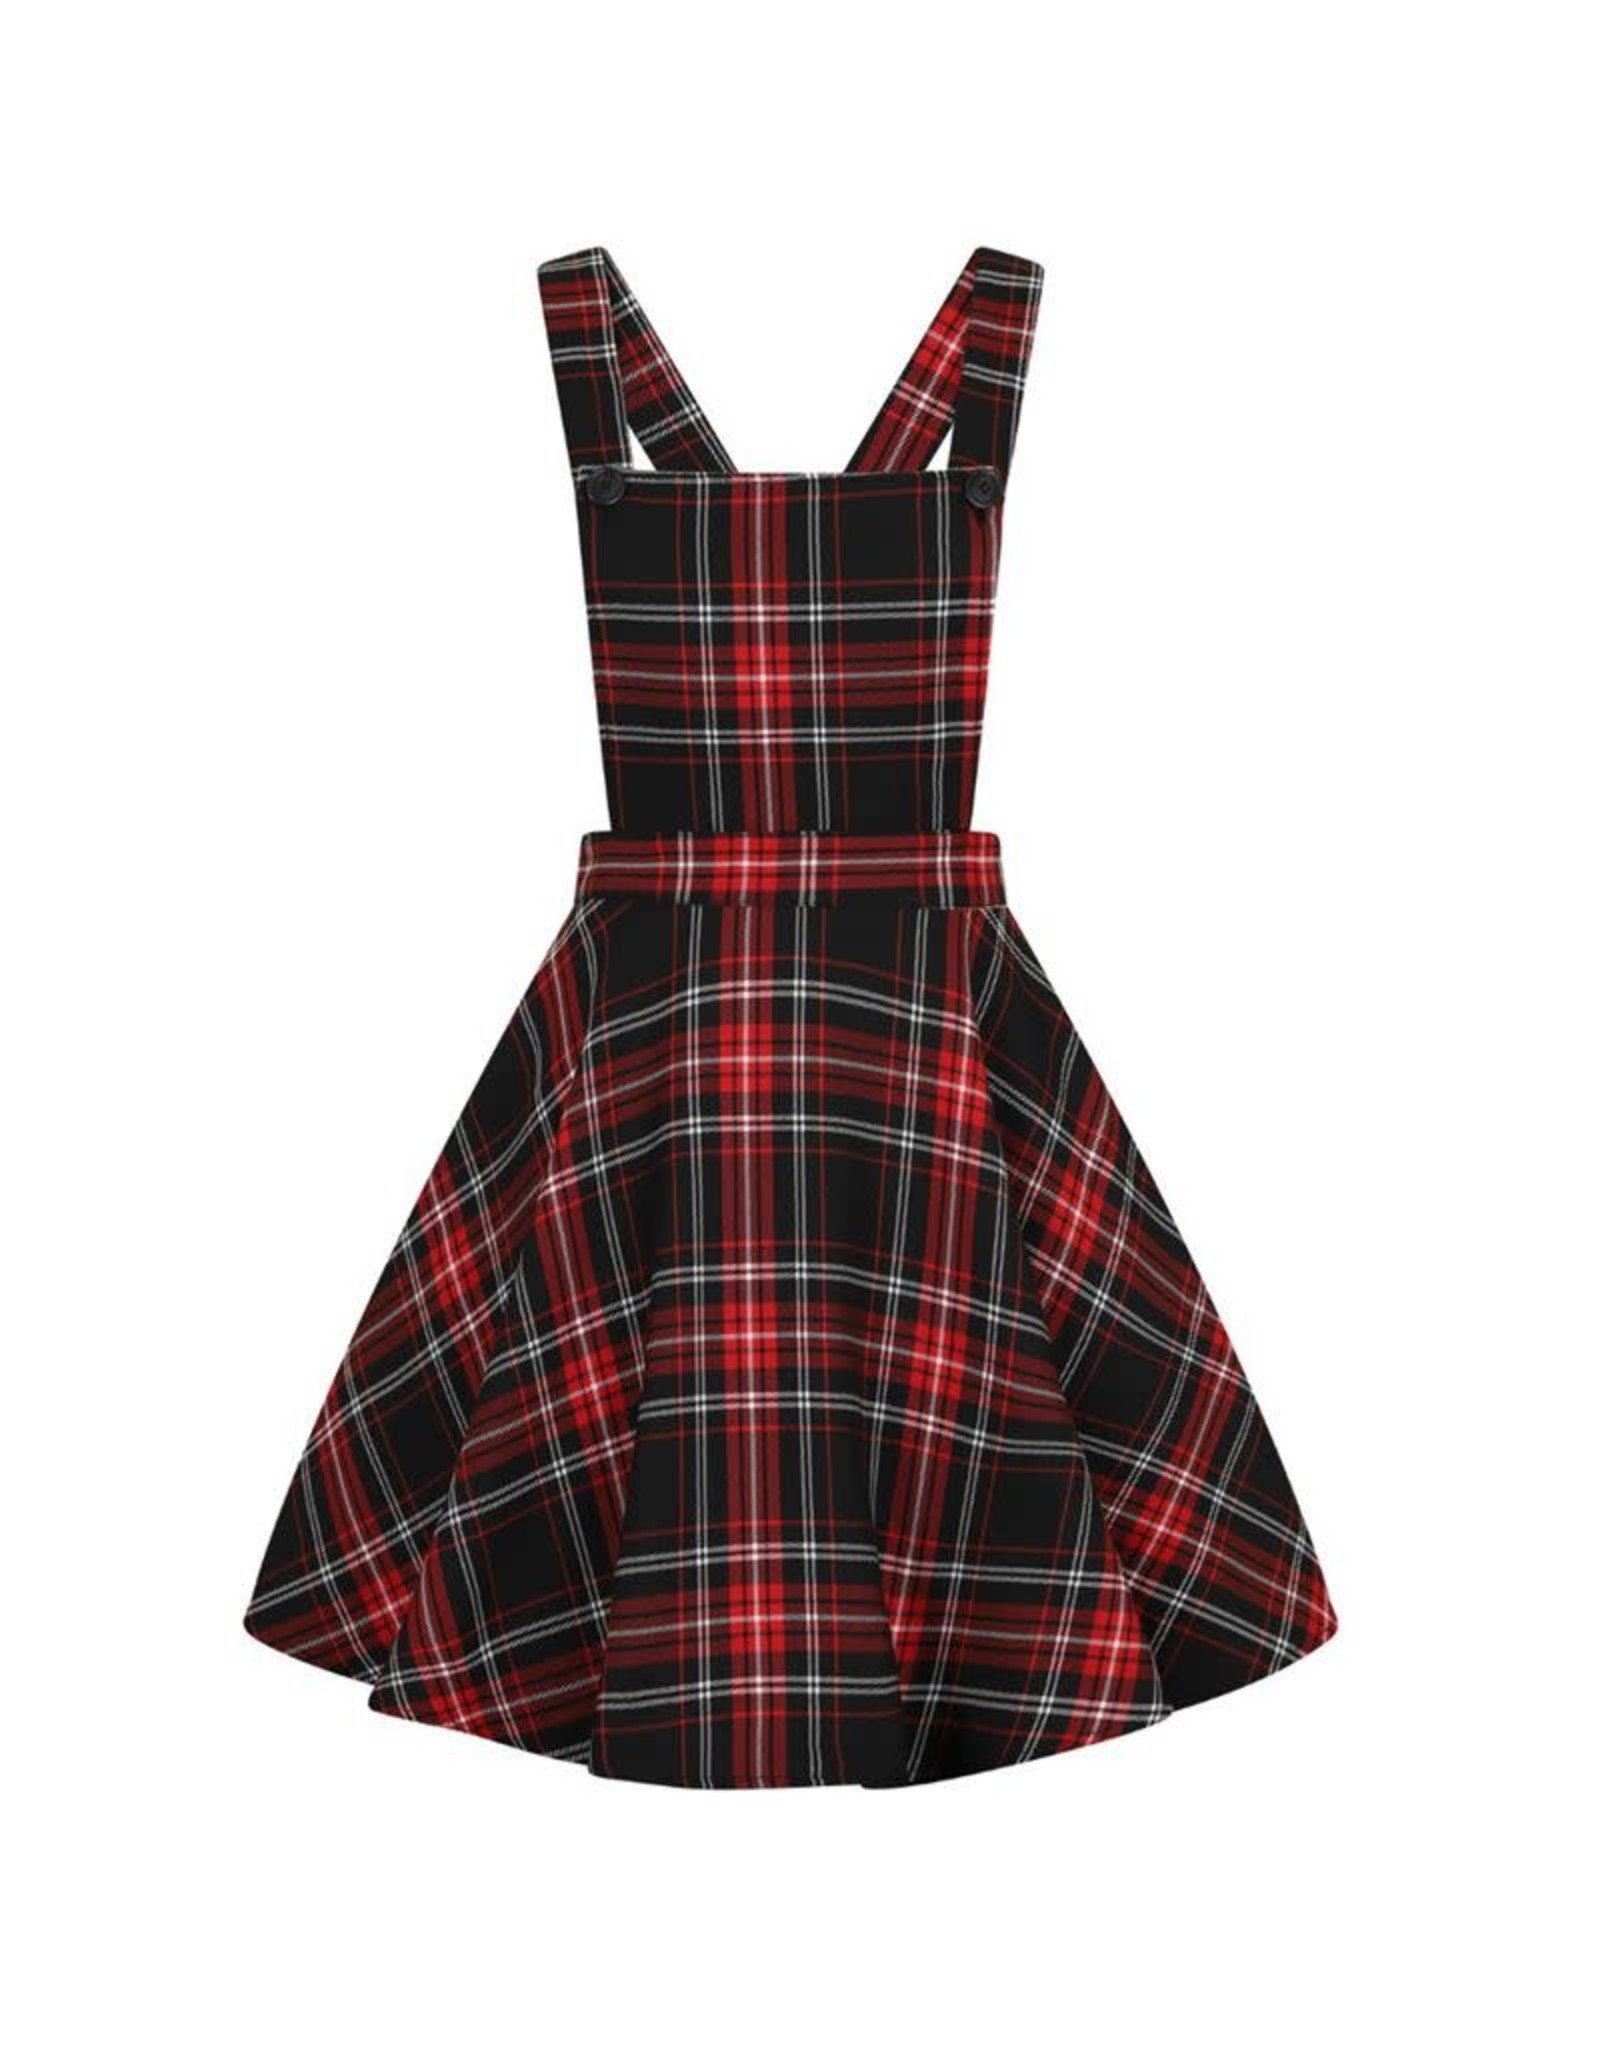 HELL BUNNY - Islay Pinafore Red Dress